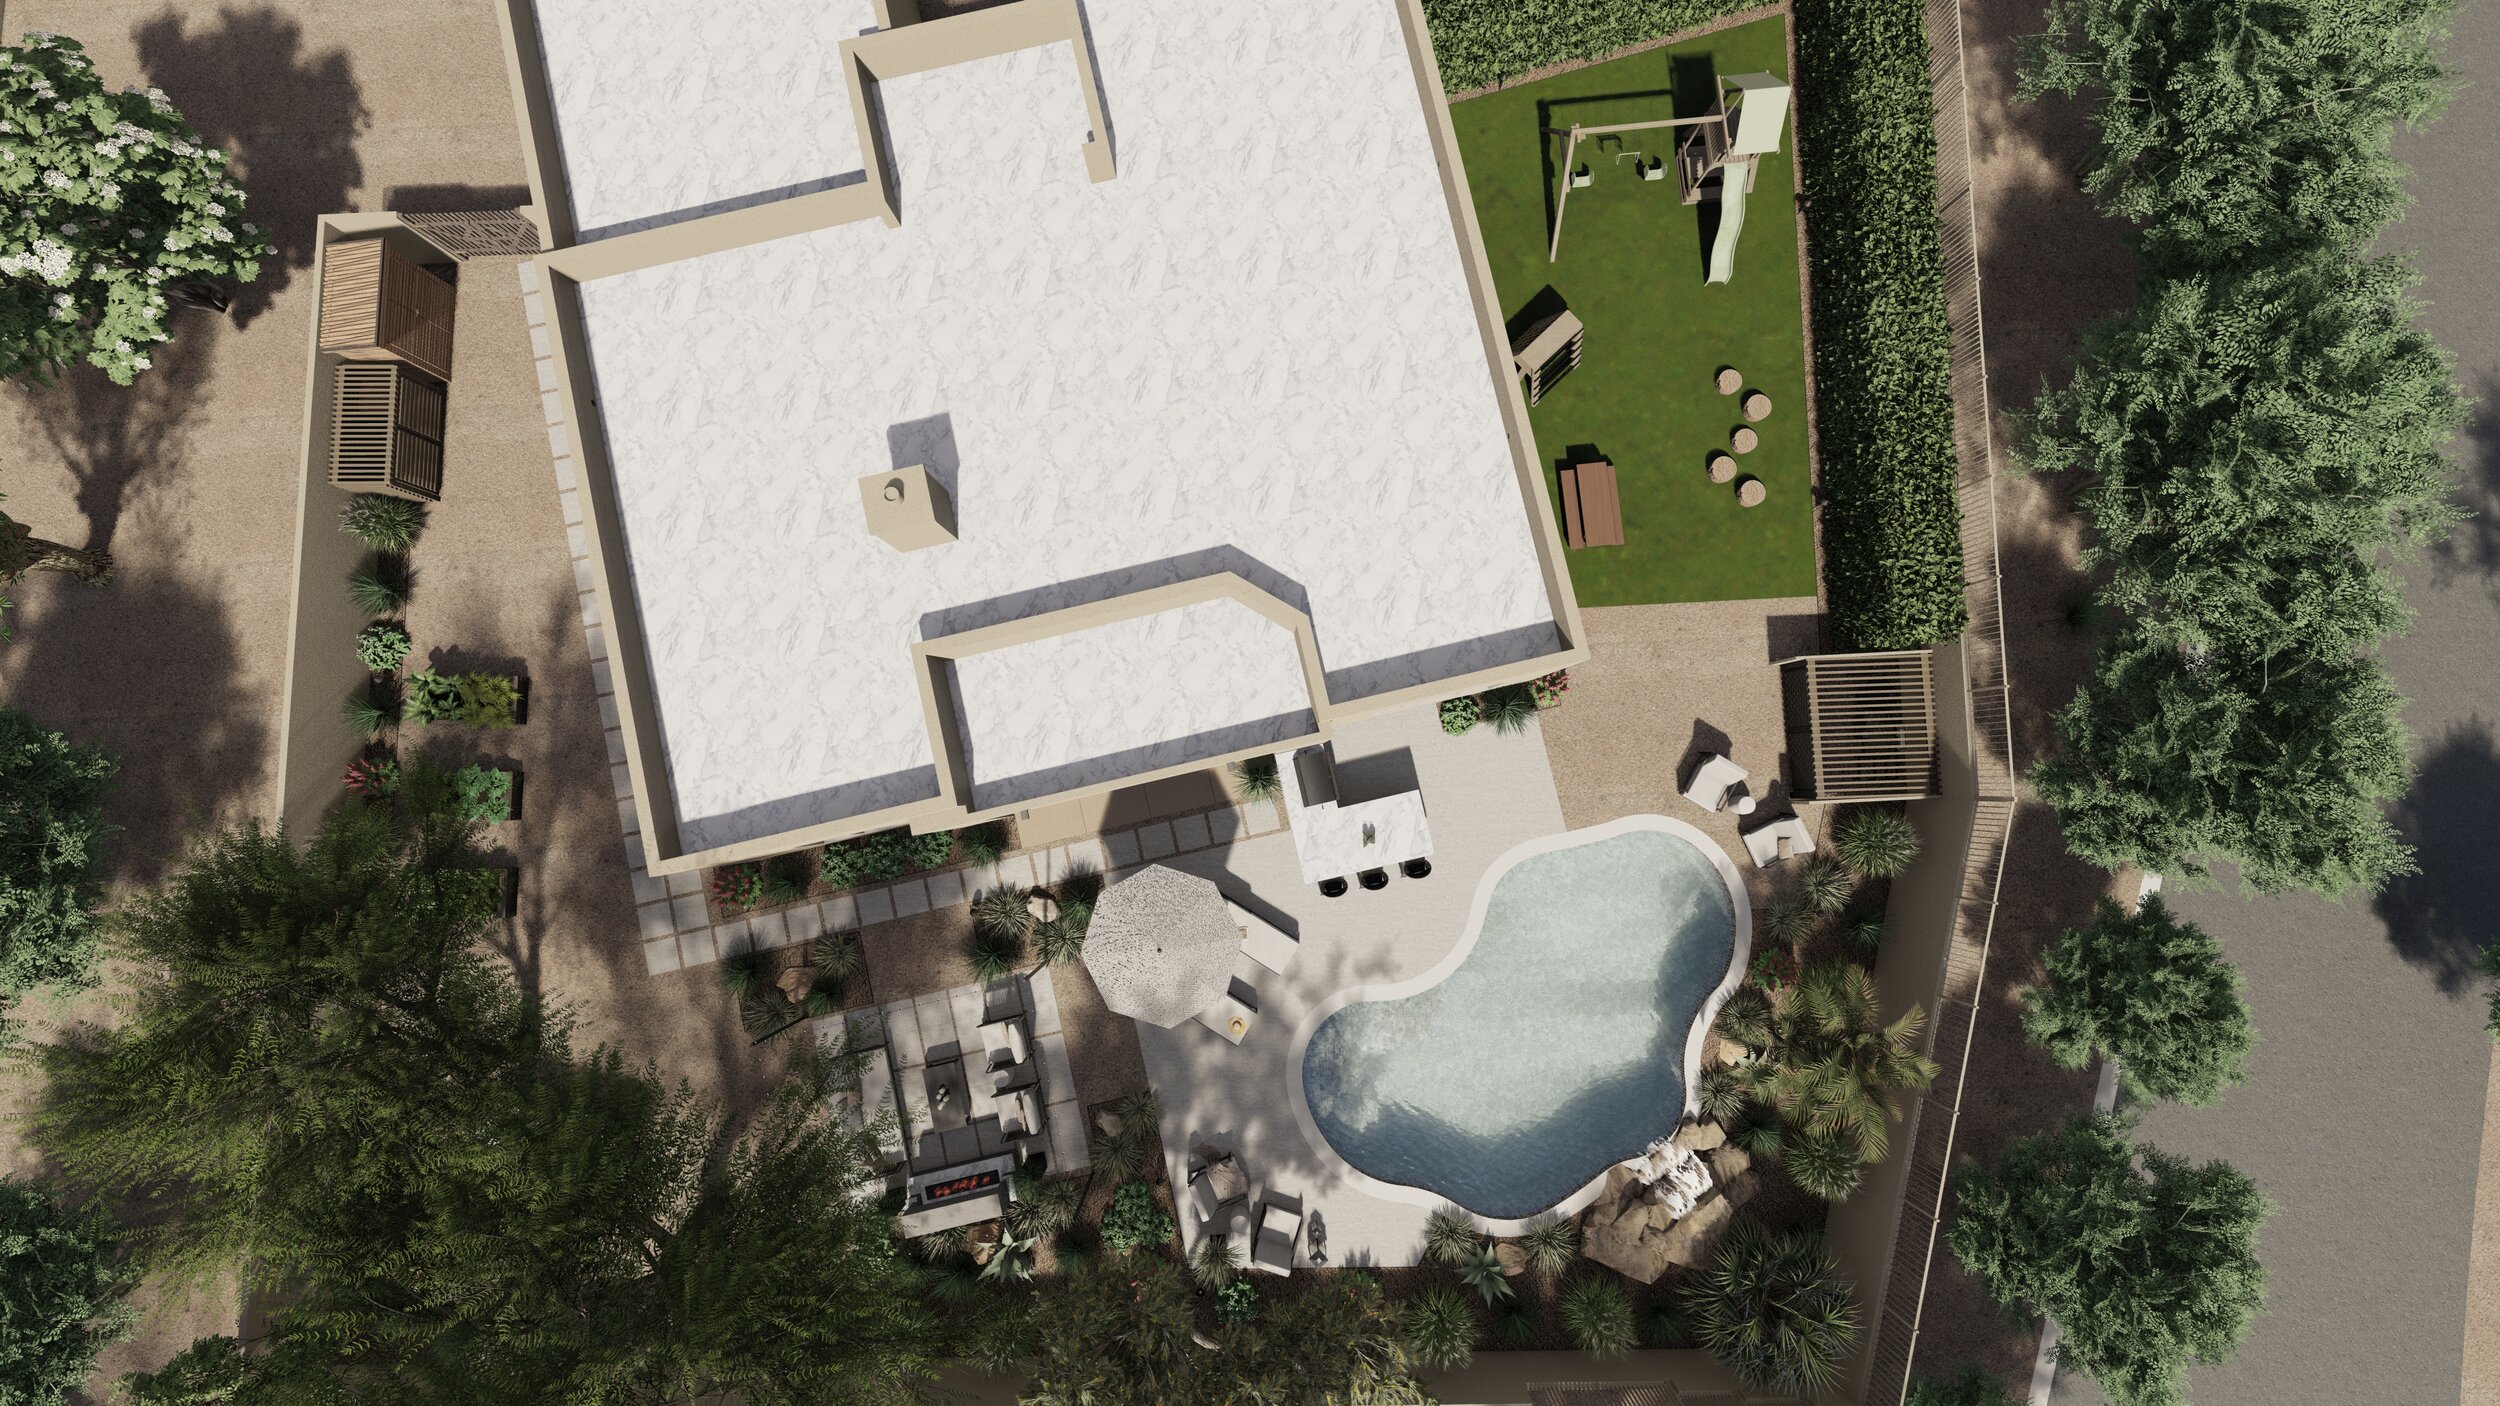 Overhead view of desert inspired backyard with swimming pool near outdoor kitchen with bar top seating, lounge area, kid's play area and fire pit